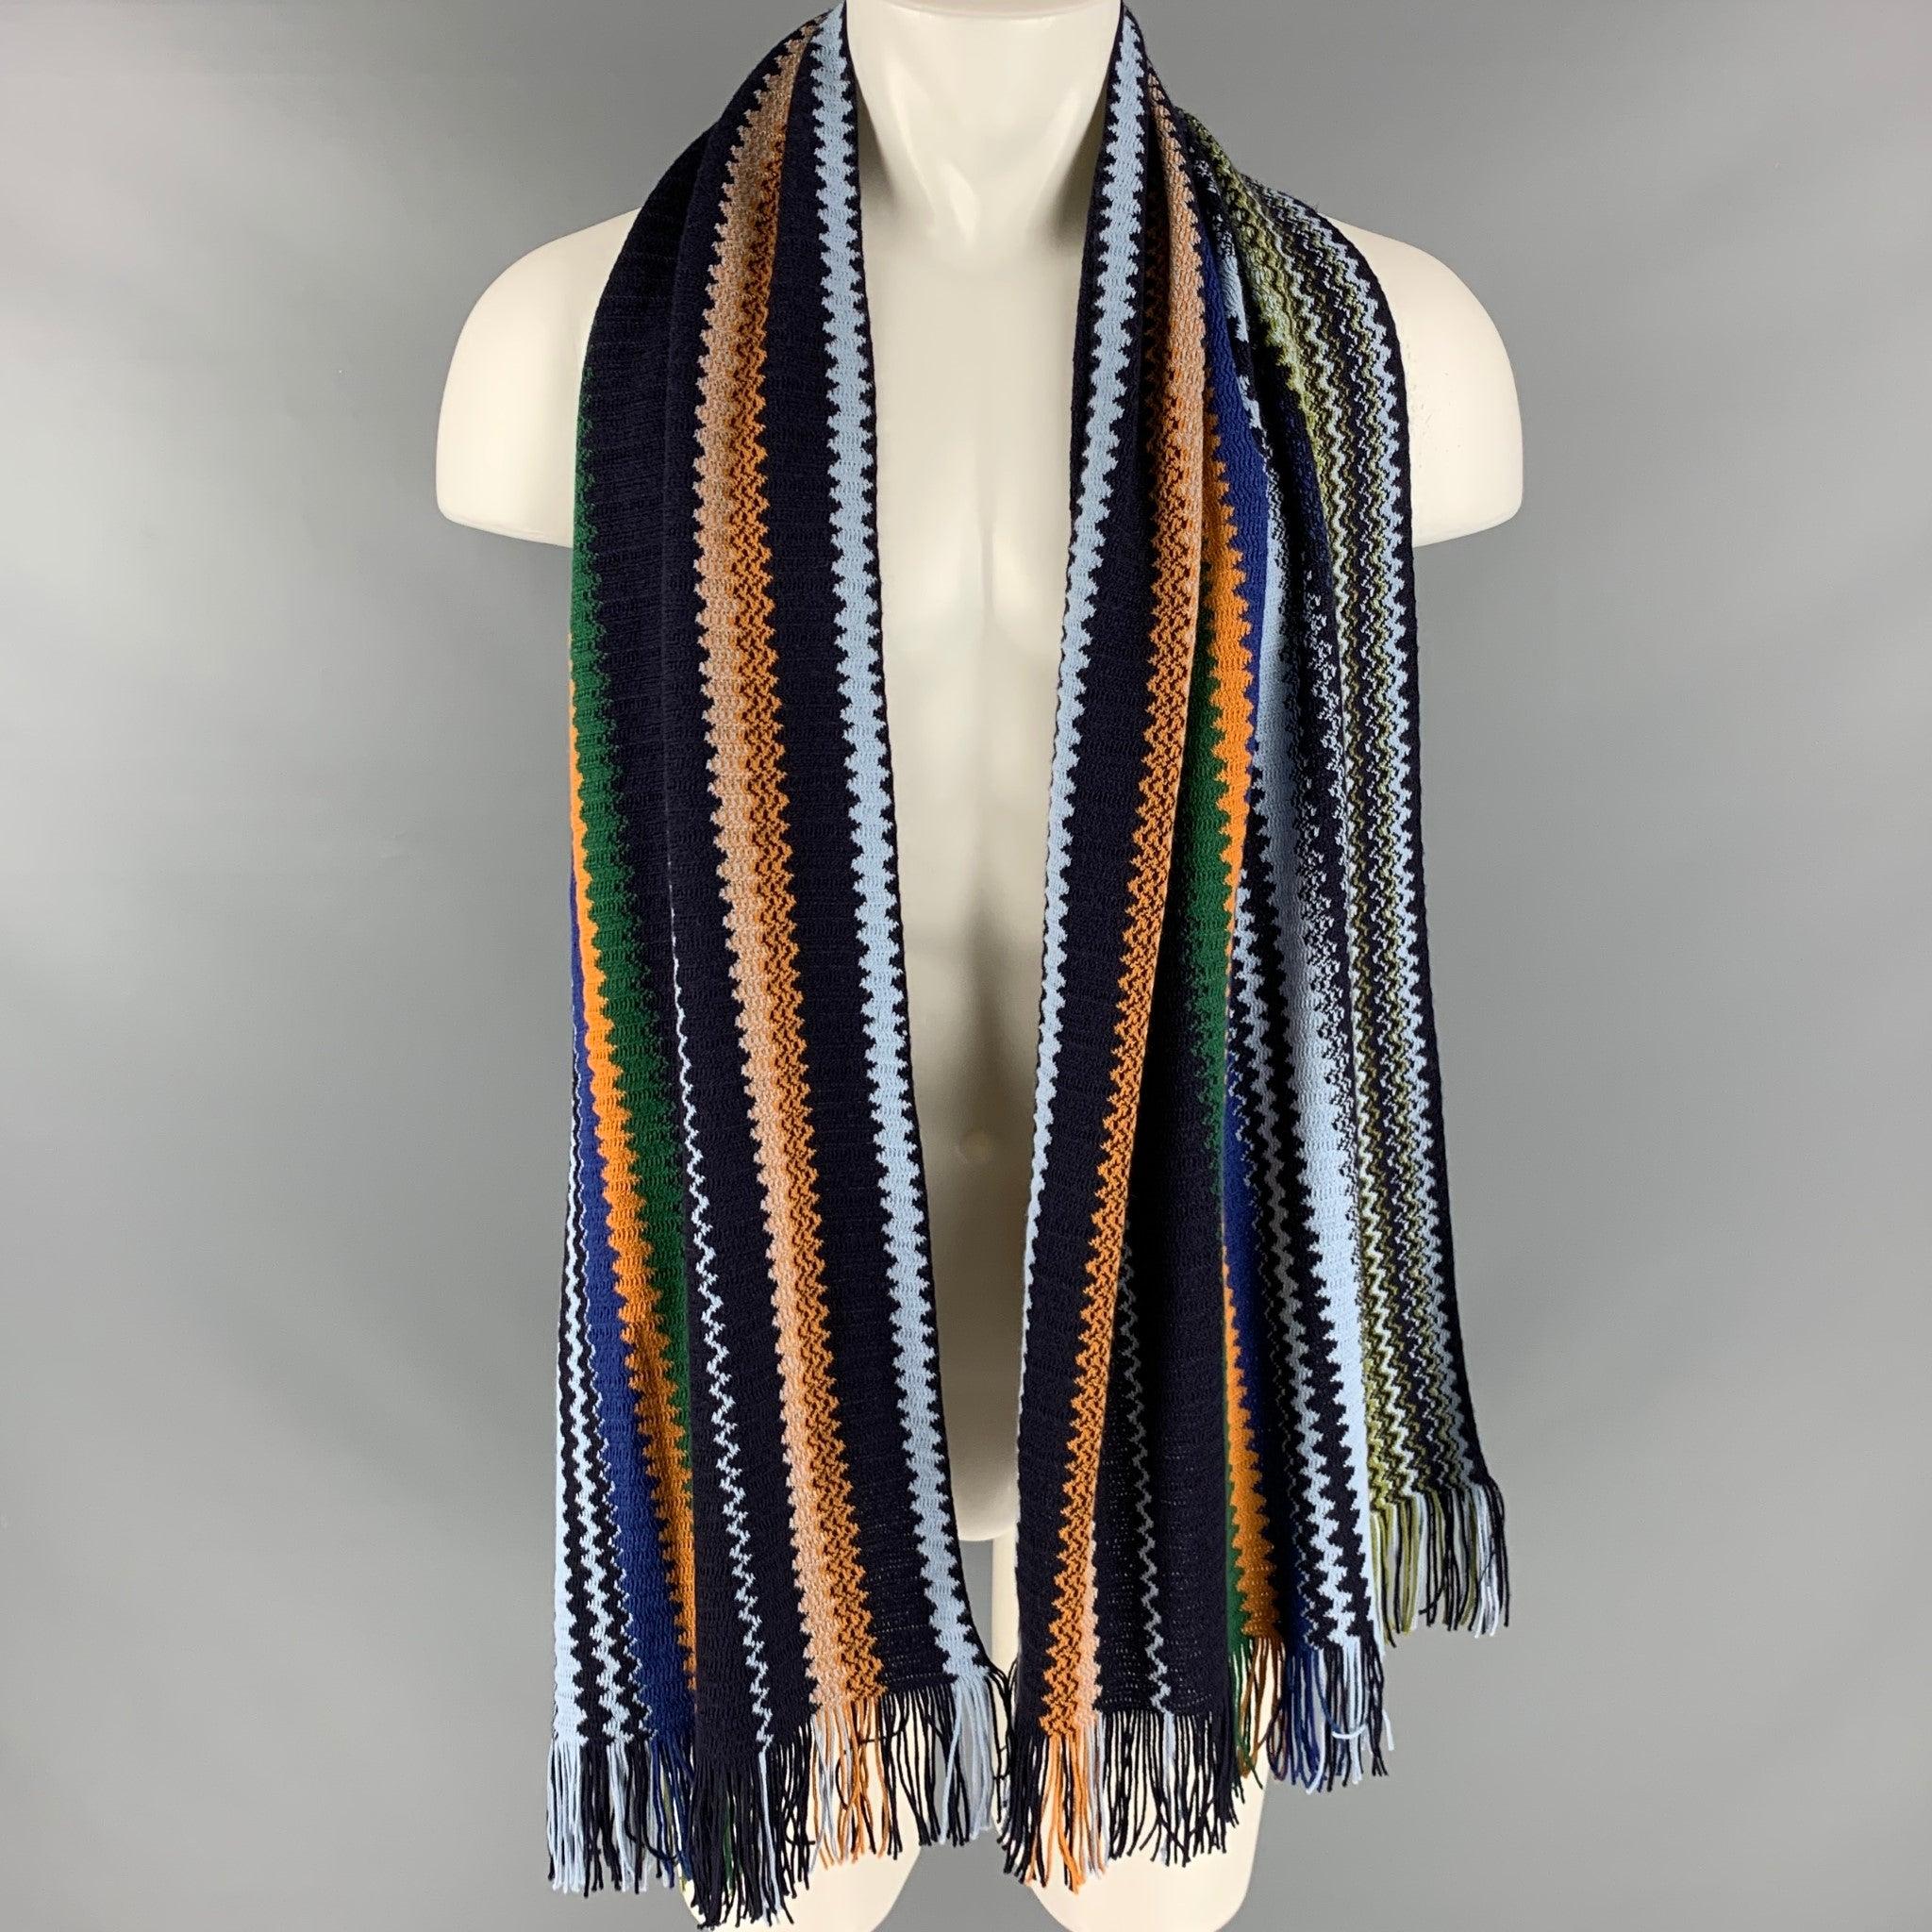 MISSONI
scarf in a multi-color wool blend knit fabric, featuring zig-zag pattern and fringe trim.Excellent Pre-Owned Condition. 

Measurements: 
  36 inches  x 18.5 inches 
  
  
 
Reference: 126323
Category: Scarves & Shawls
More Details
   